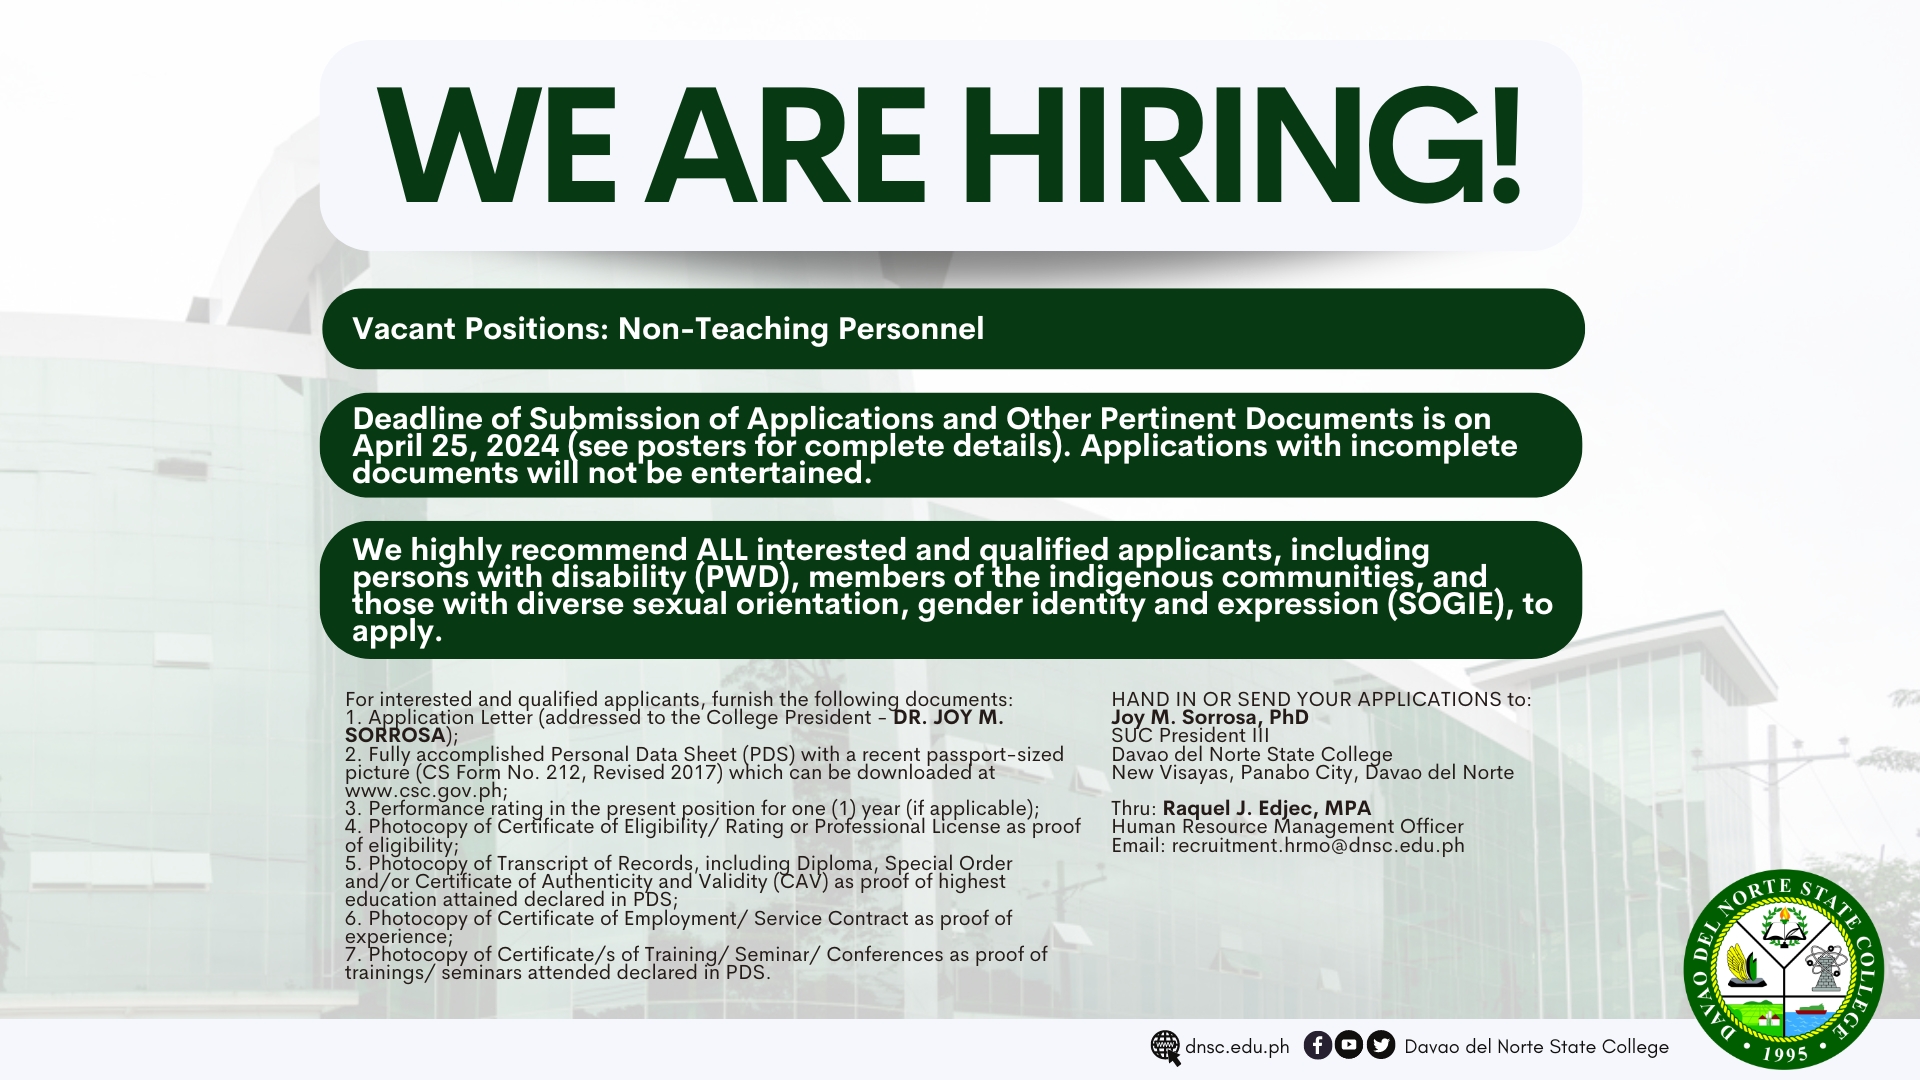 [HIRING] NON-TEACHING PERSONNEL. HAND IN OR EMAIL YOUR APPLICATIONS ON OR BEFORE APRIL 25, 2024.